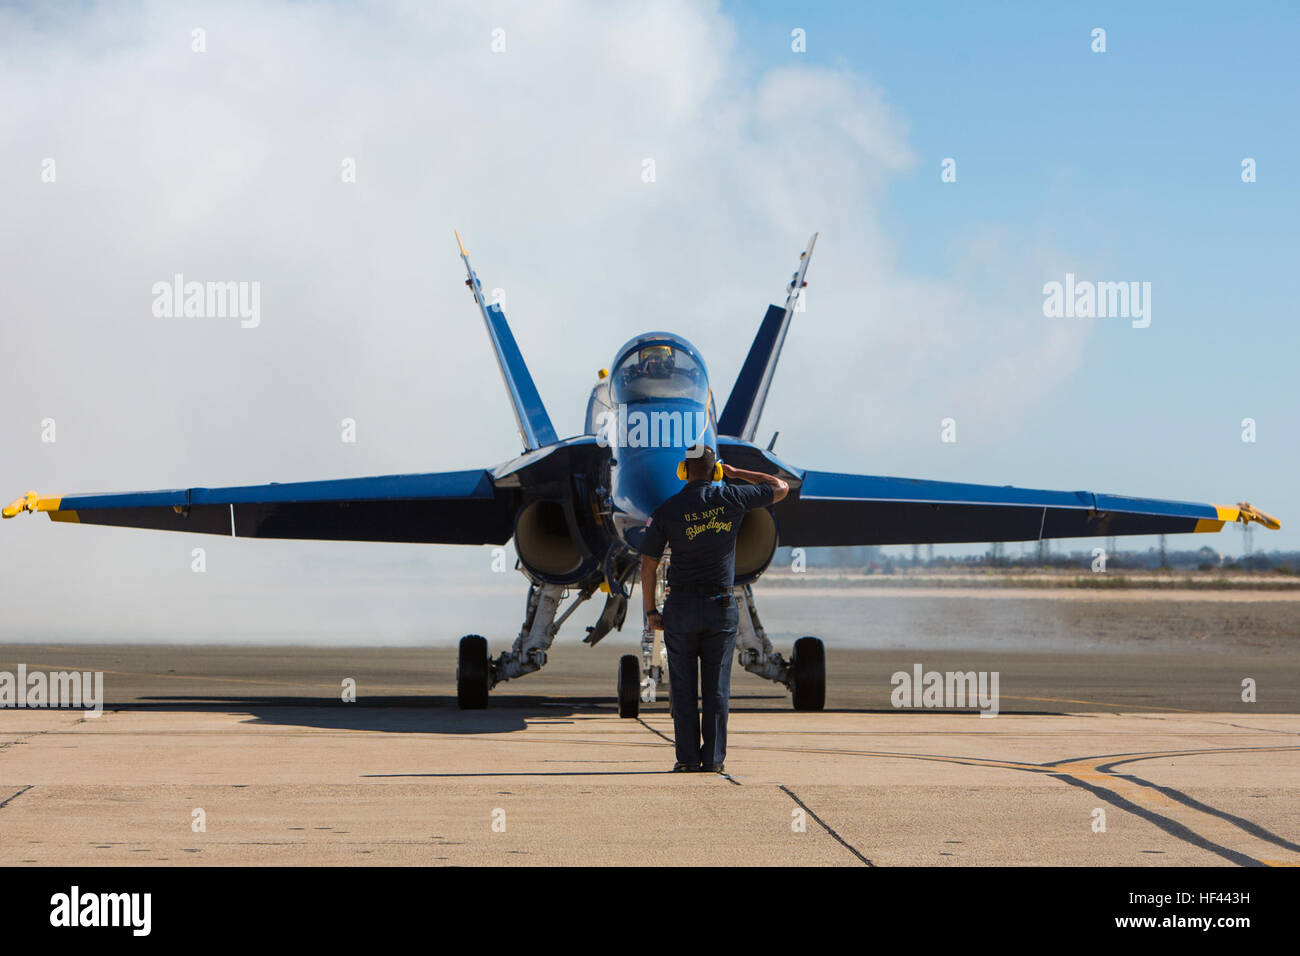 A U.S. Navy Blue Angels crew member renders his salute to a Blue Angels pilot before takeoff during the 2016 Marine Corps Air Station (MCAS) Miramar Air Show at MCAS Miramar, Calif., Sept. 24, 2016. The MCAS Miramar Air Show honors 100 years of the Marine Corps Reserves by showcasing aerial prowess of the Armed Forces and their appreciation of the civilian community’s support to the troops. (U.S. Marine Corps photo By Corporal Jessica Y. Lucio/Released) MCAS Miramar Air Show 160924-M-UX416-003 Stock Photo